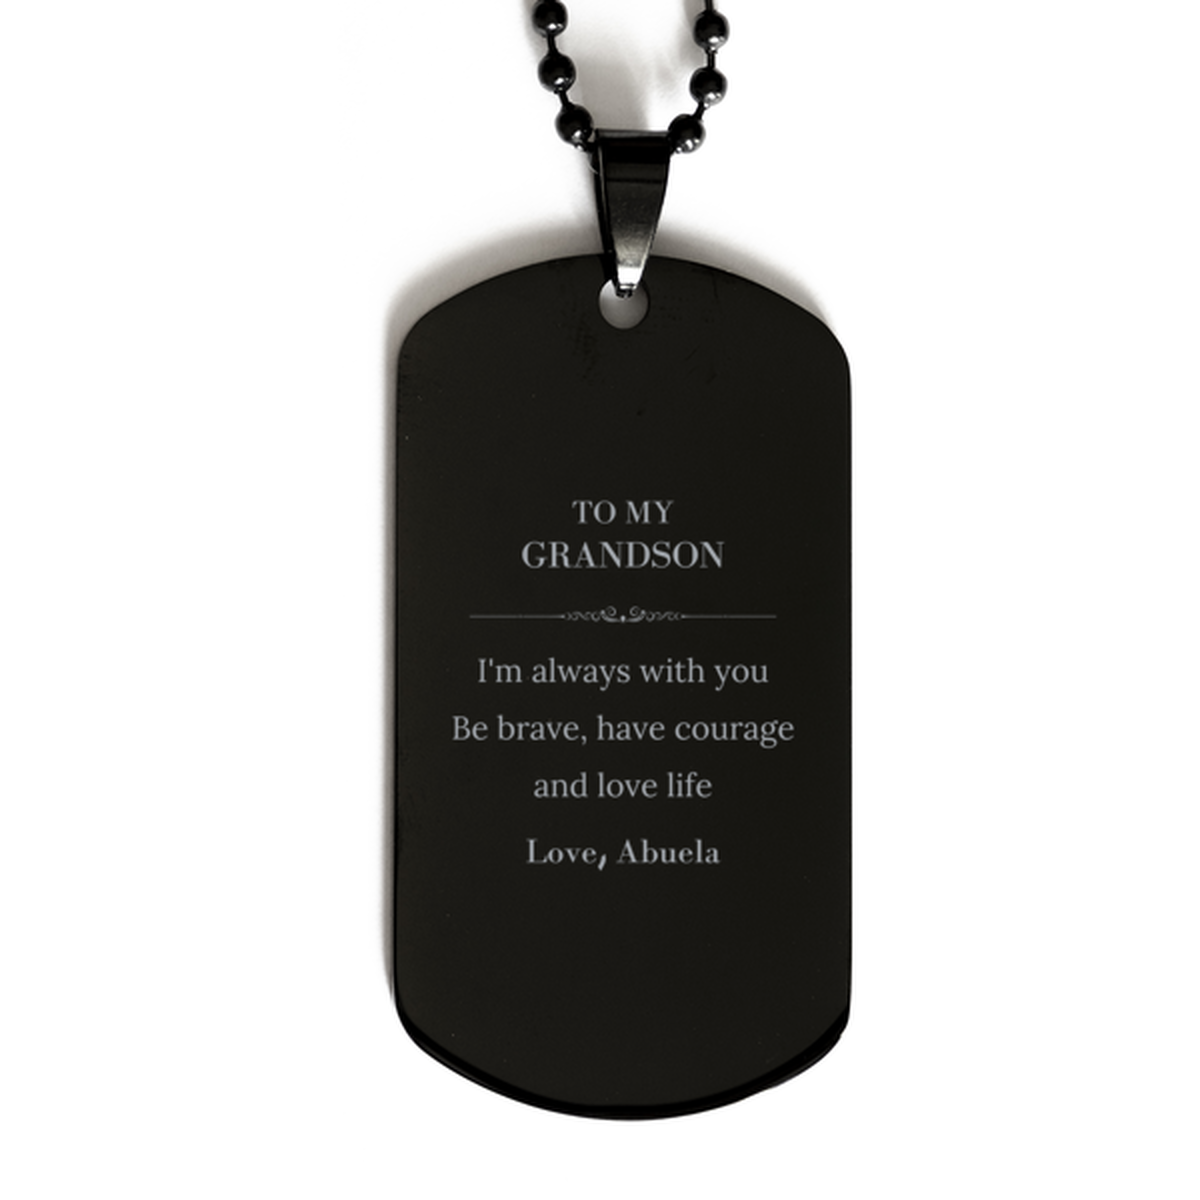 To My Grandson Gifts from Abuela, Unique Black Dog Tag Inspirational Christmas Birthday Graduation Gifts for Grandson I'm always with you. Be brave, have courage and love life. Love, Abuela